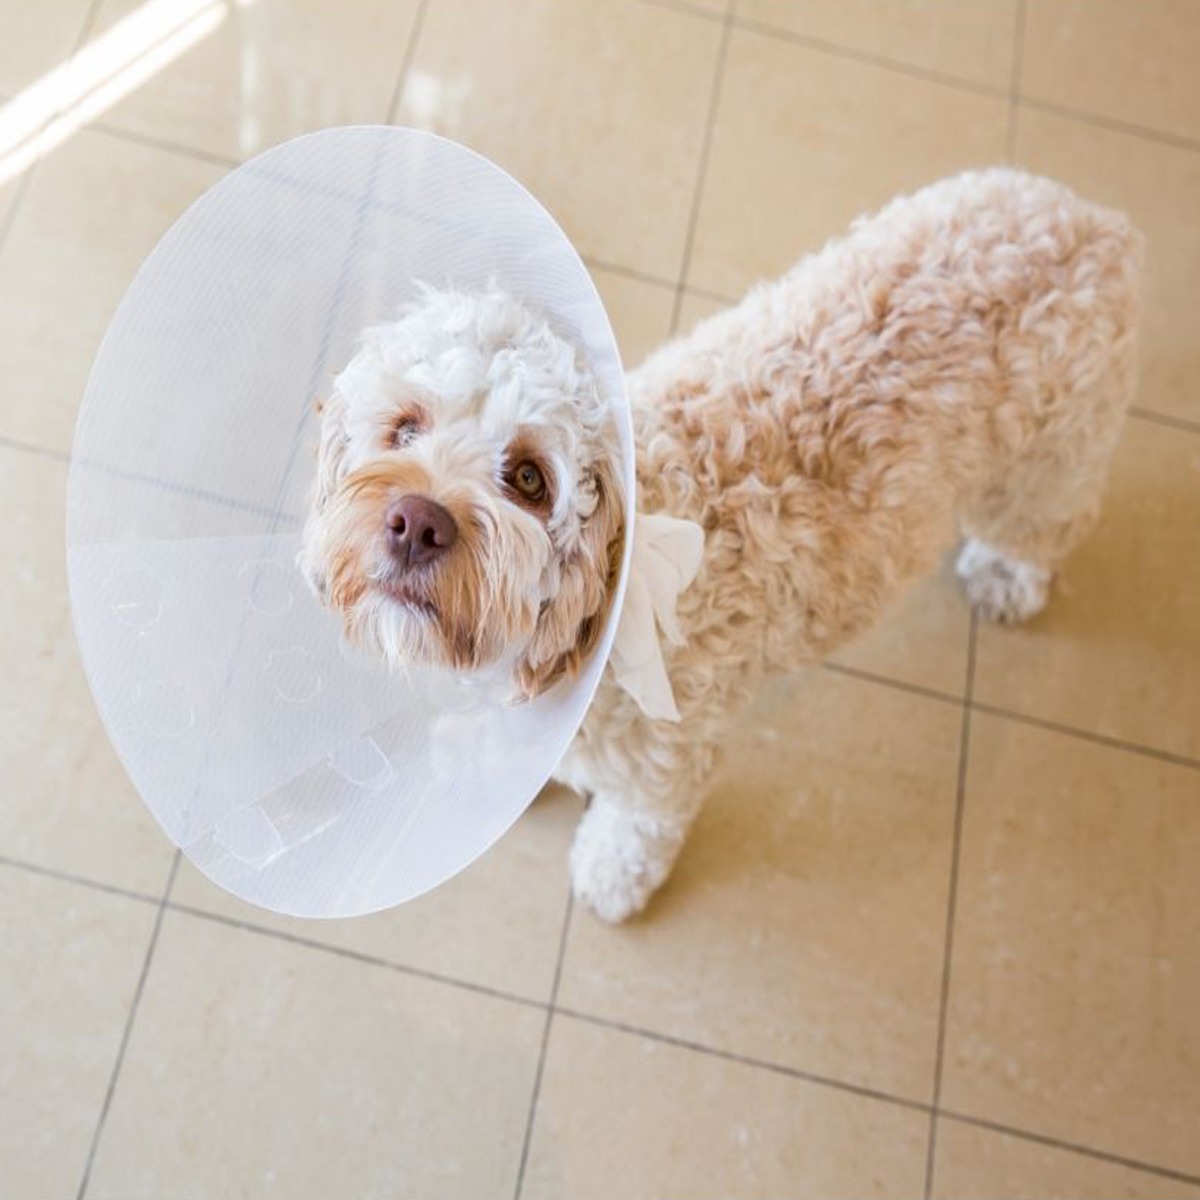 A dog with a cone around its head